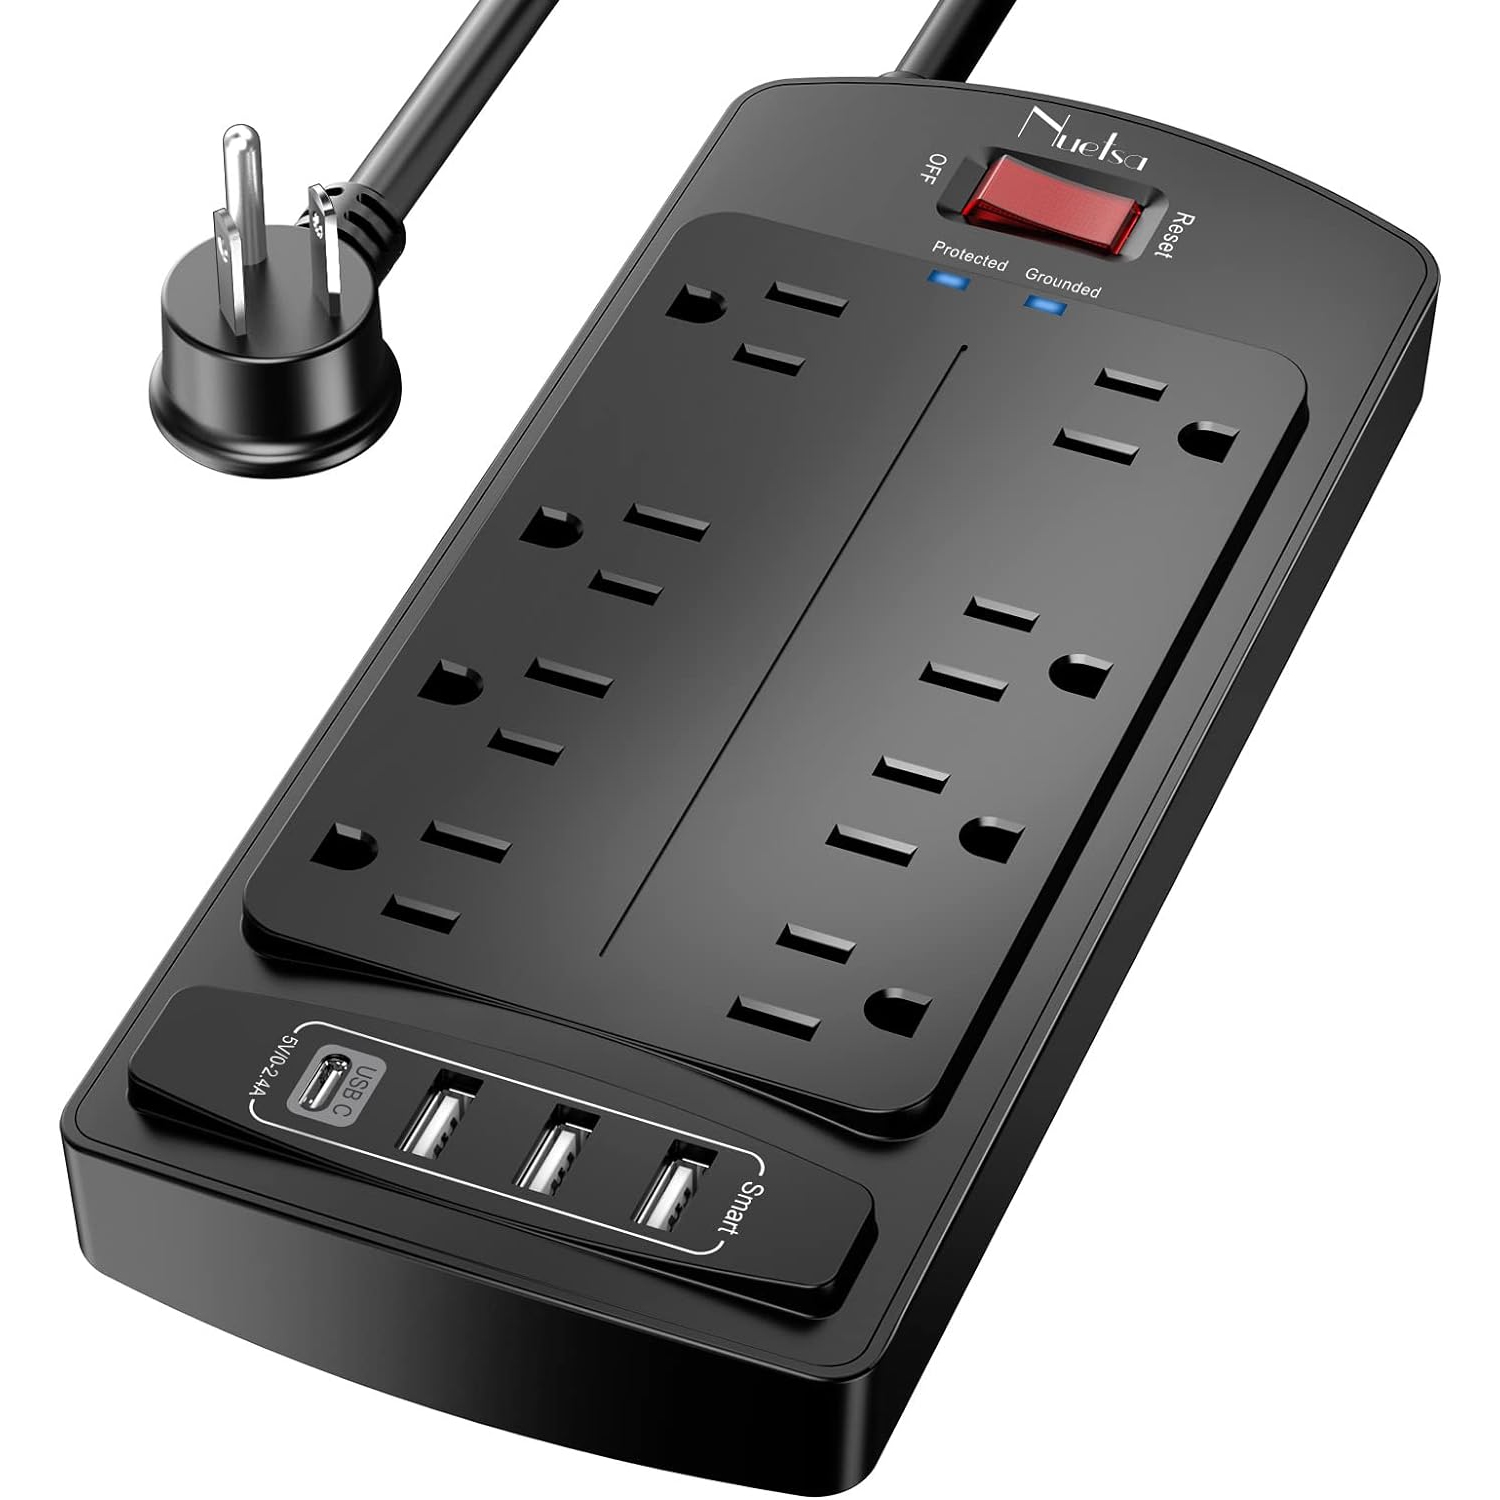 Nuetsa Surge Protector 8 AC Outlets and 4 USB Ports(3U1C), 6 Feet Power Strip (1625W/13A) for for Home, Office, 2700 Joules, ETL Listed, Black